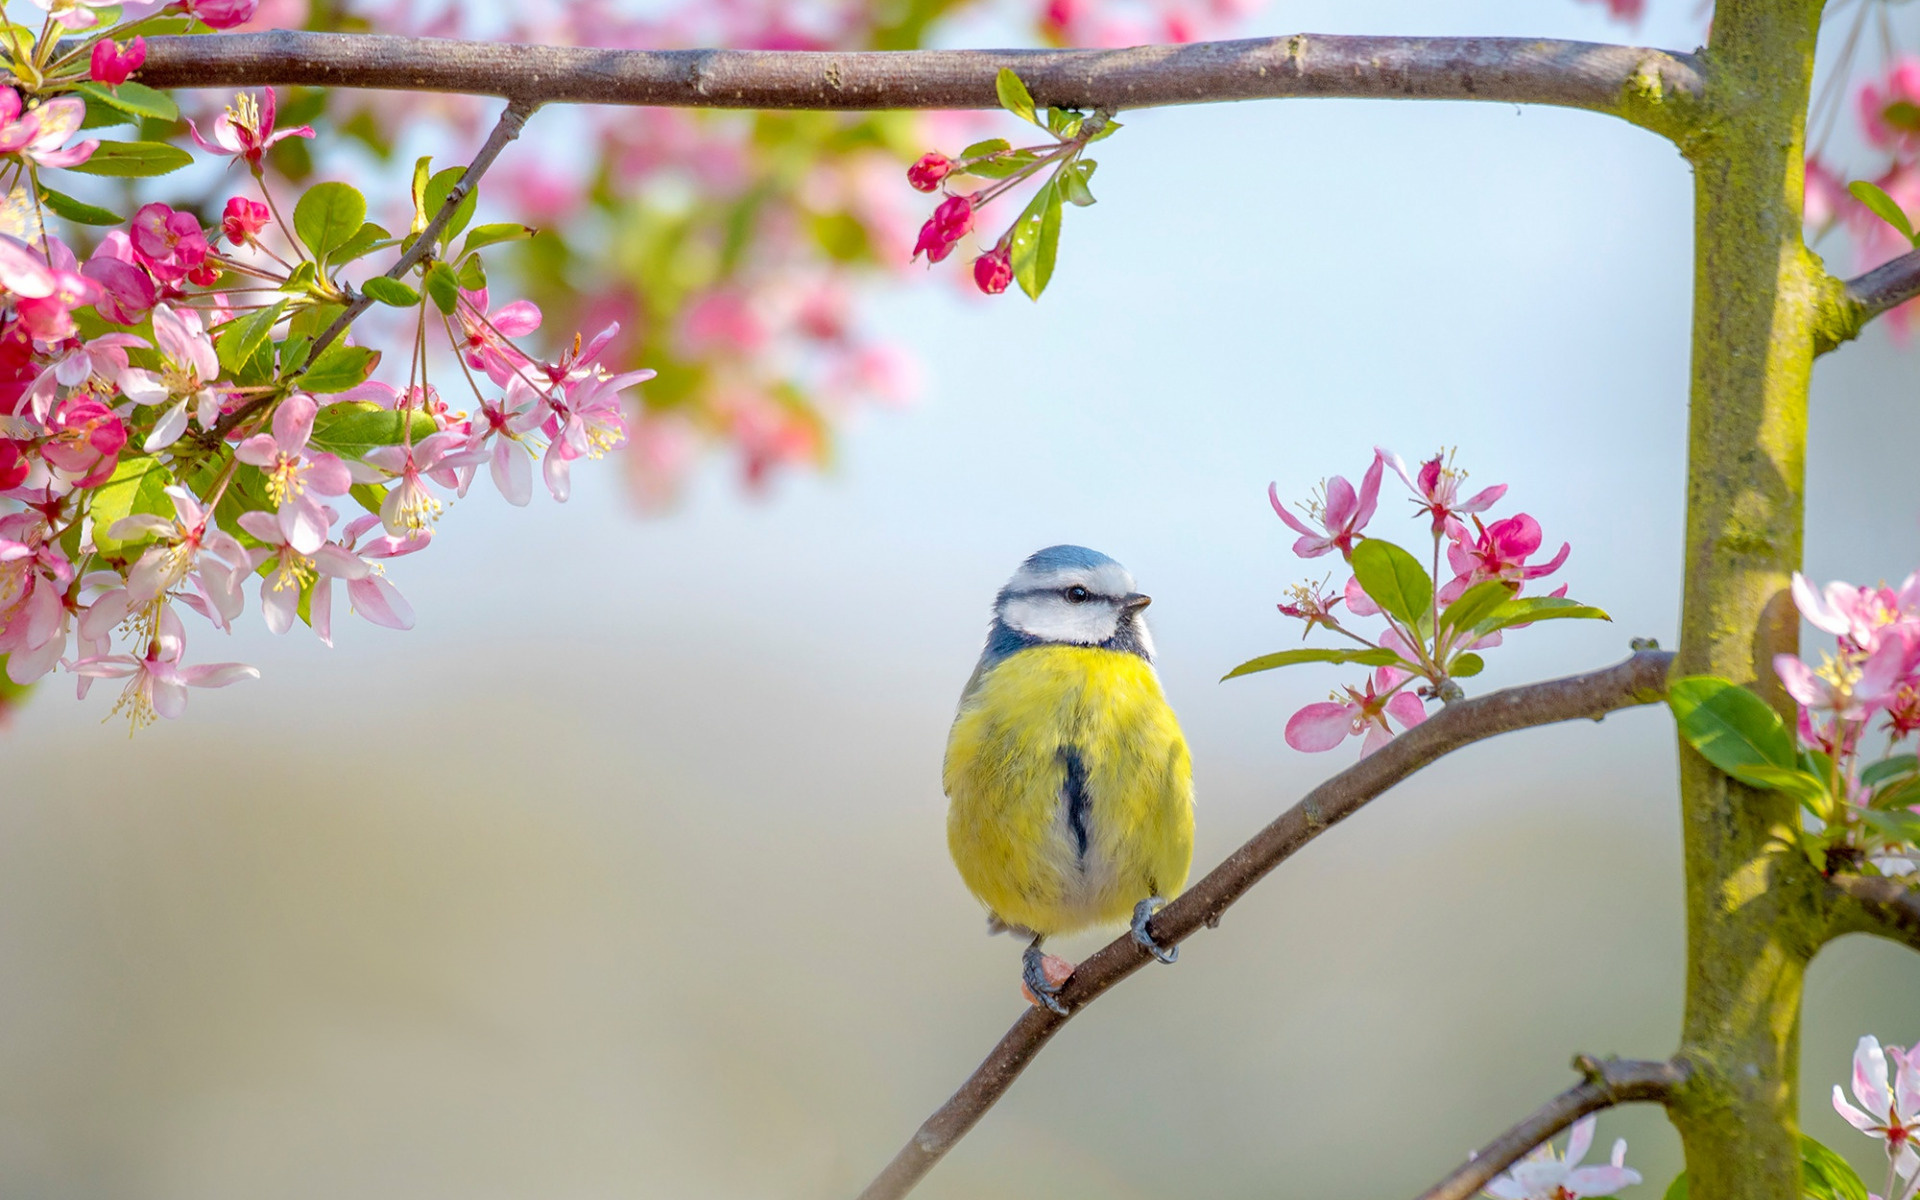 Flowers and Birds Wallpaper, Pink Bird Spring, Nature's Harmony, Vibrant Blossoms, 1920x1200 HD Desktop